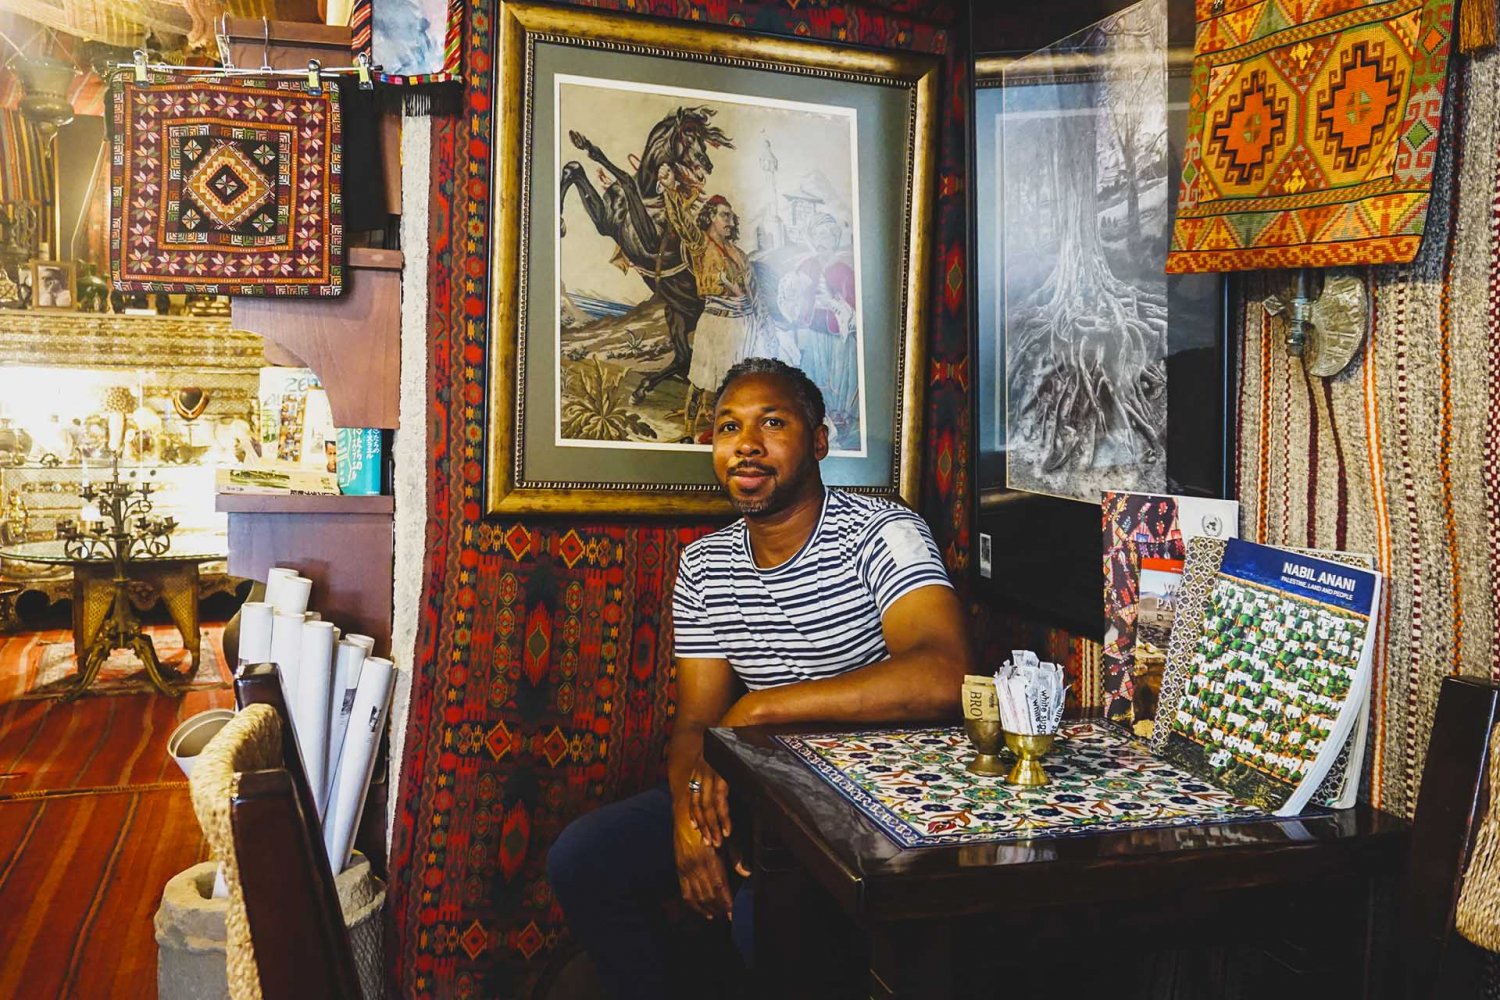 Café owner Issam Bayan sits among Palestinian artwork and tapestries that line Bassem’s Gallery & Café.